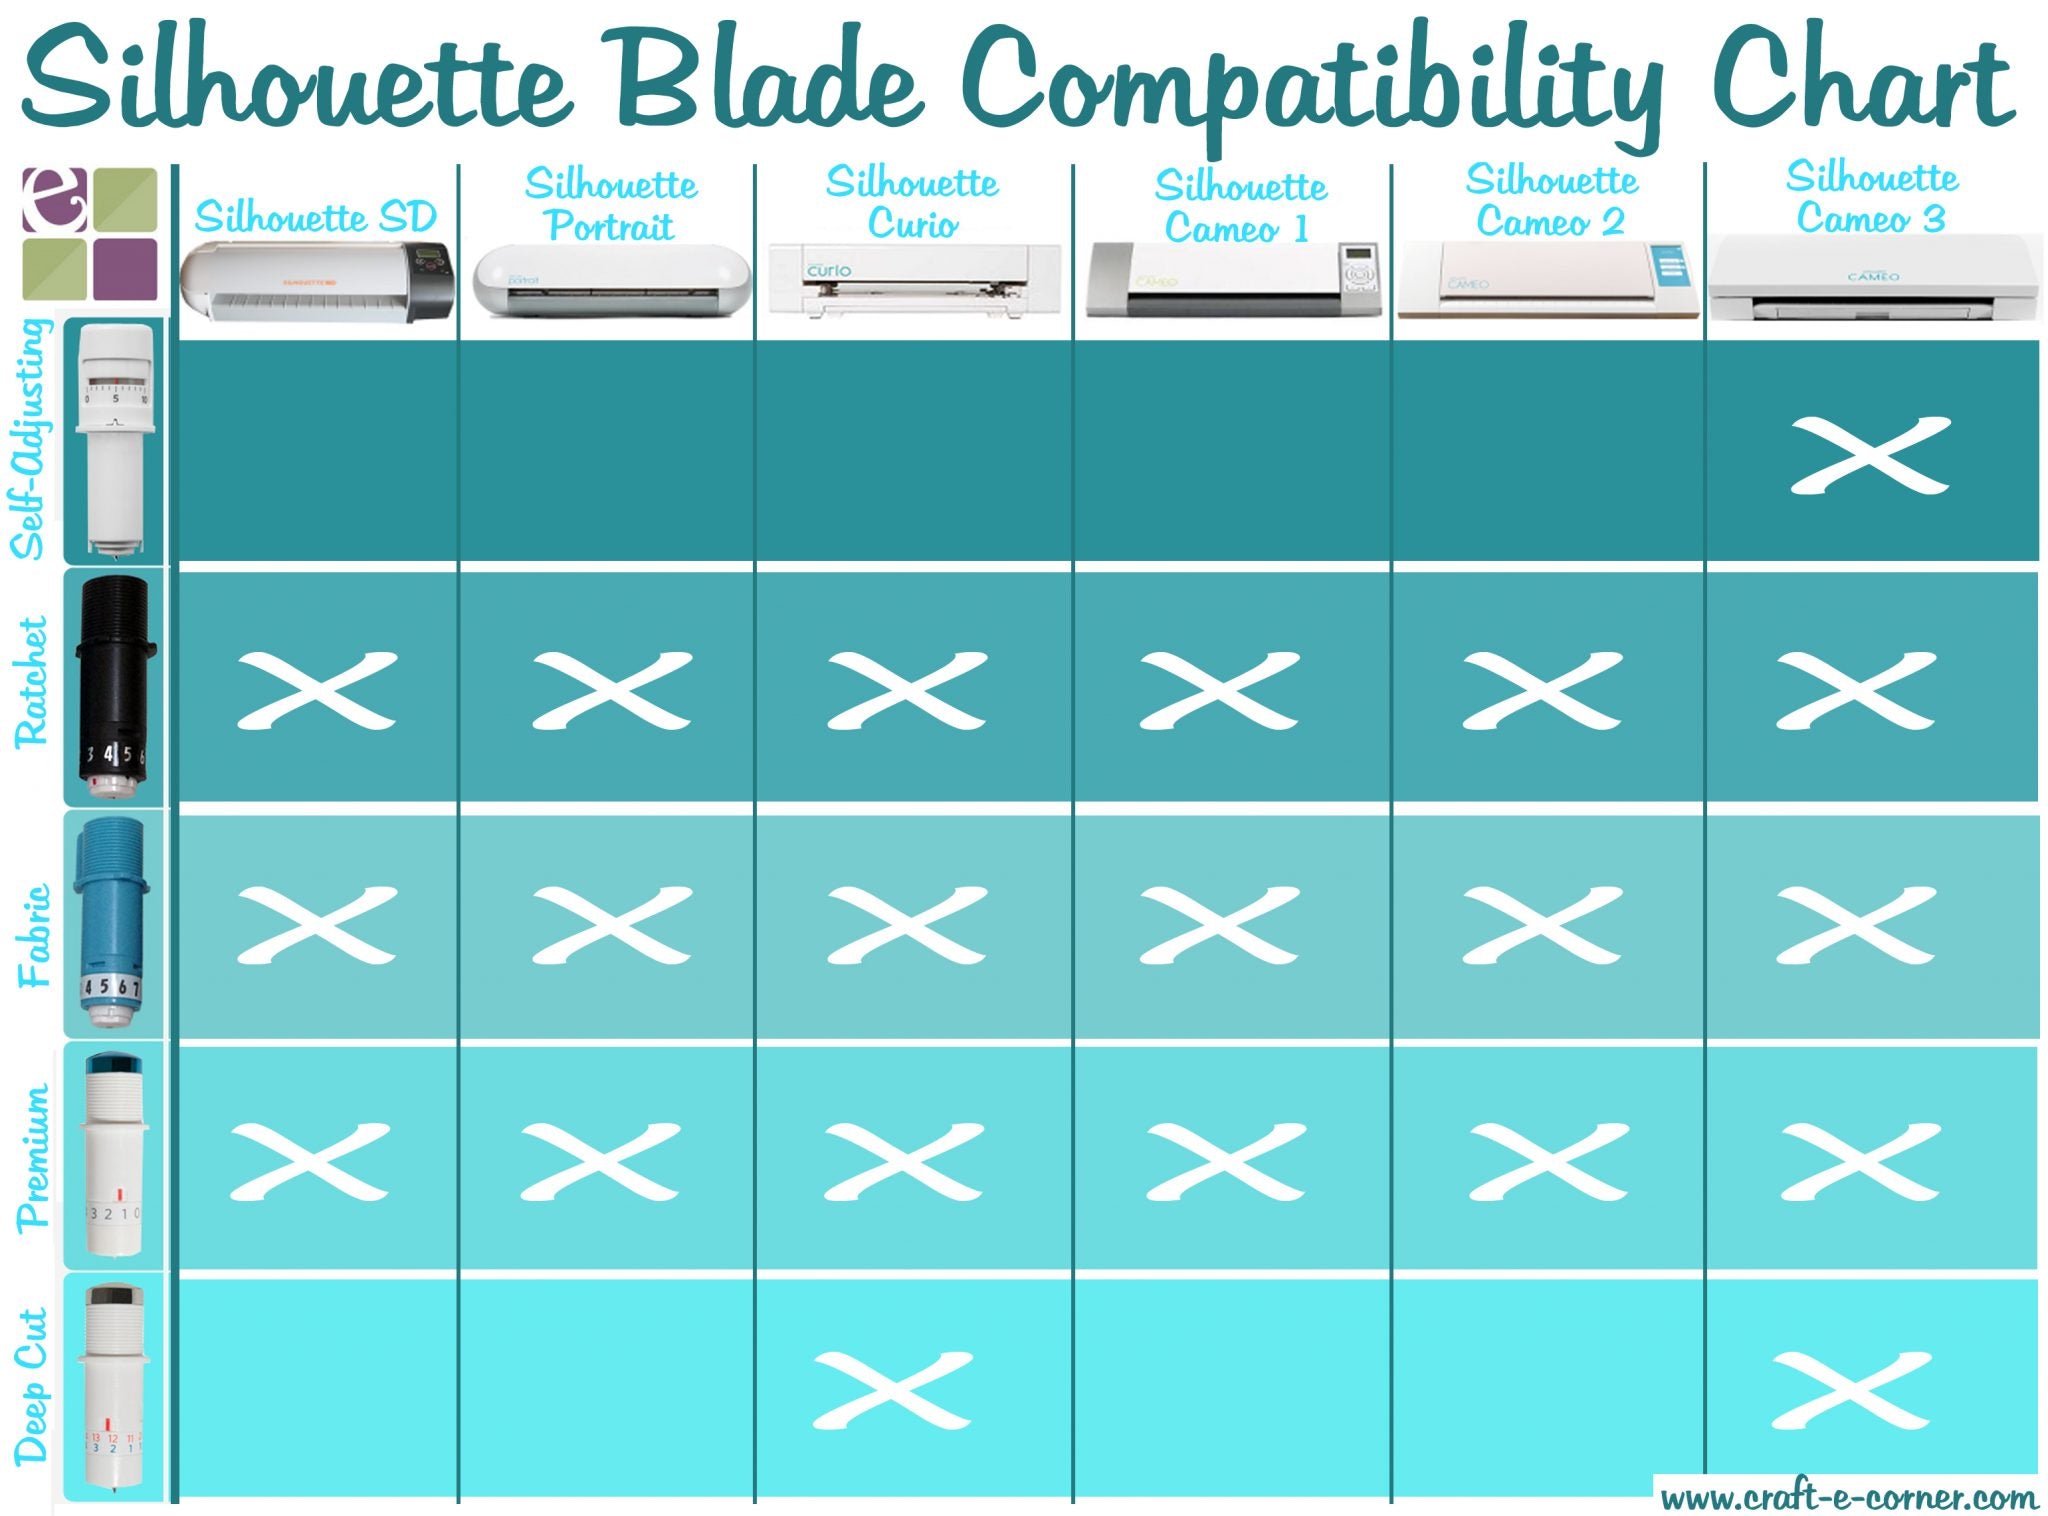 Properly Care For Your Silhouette Blade